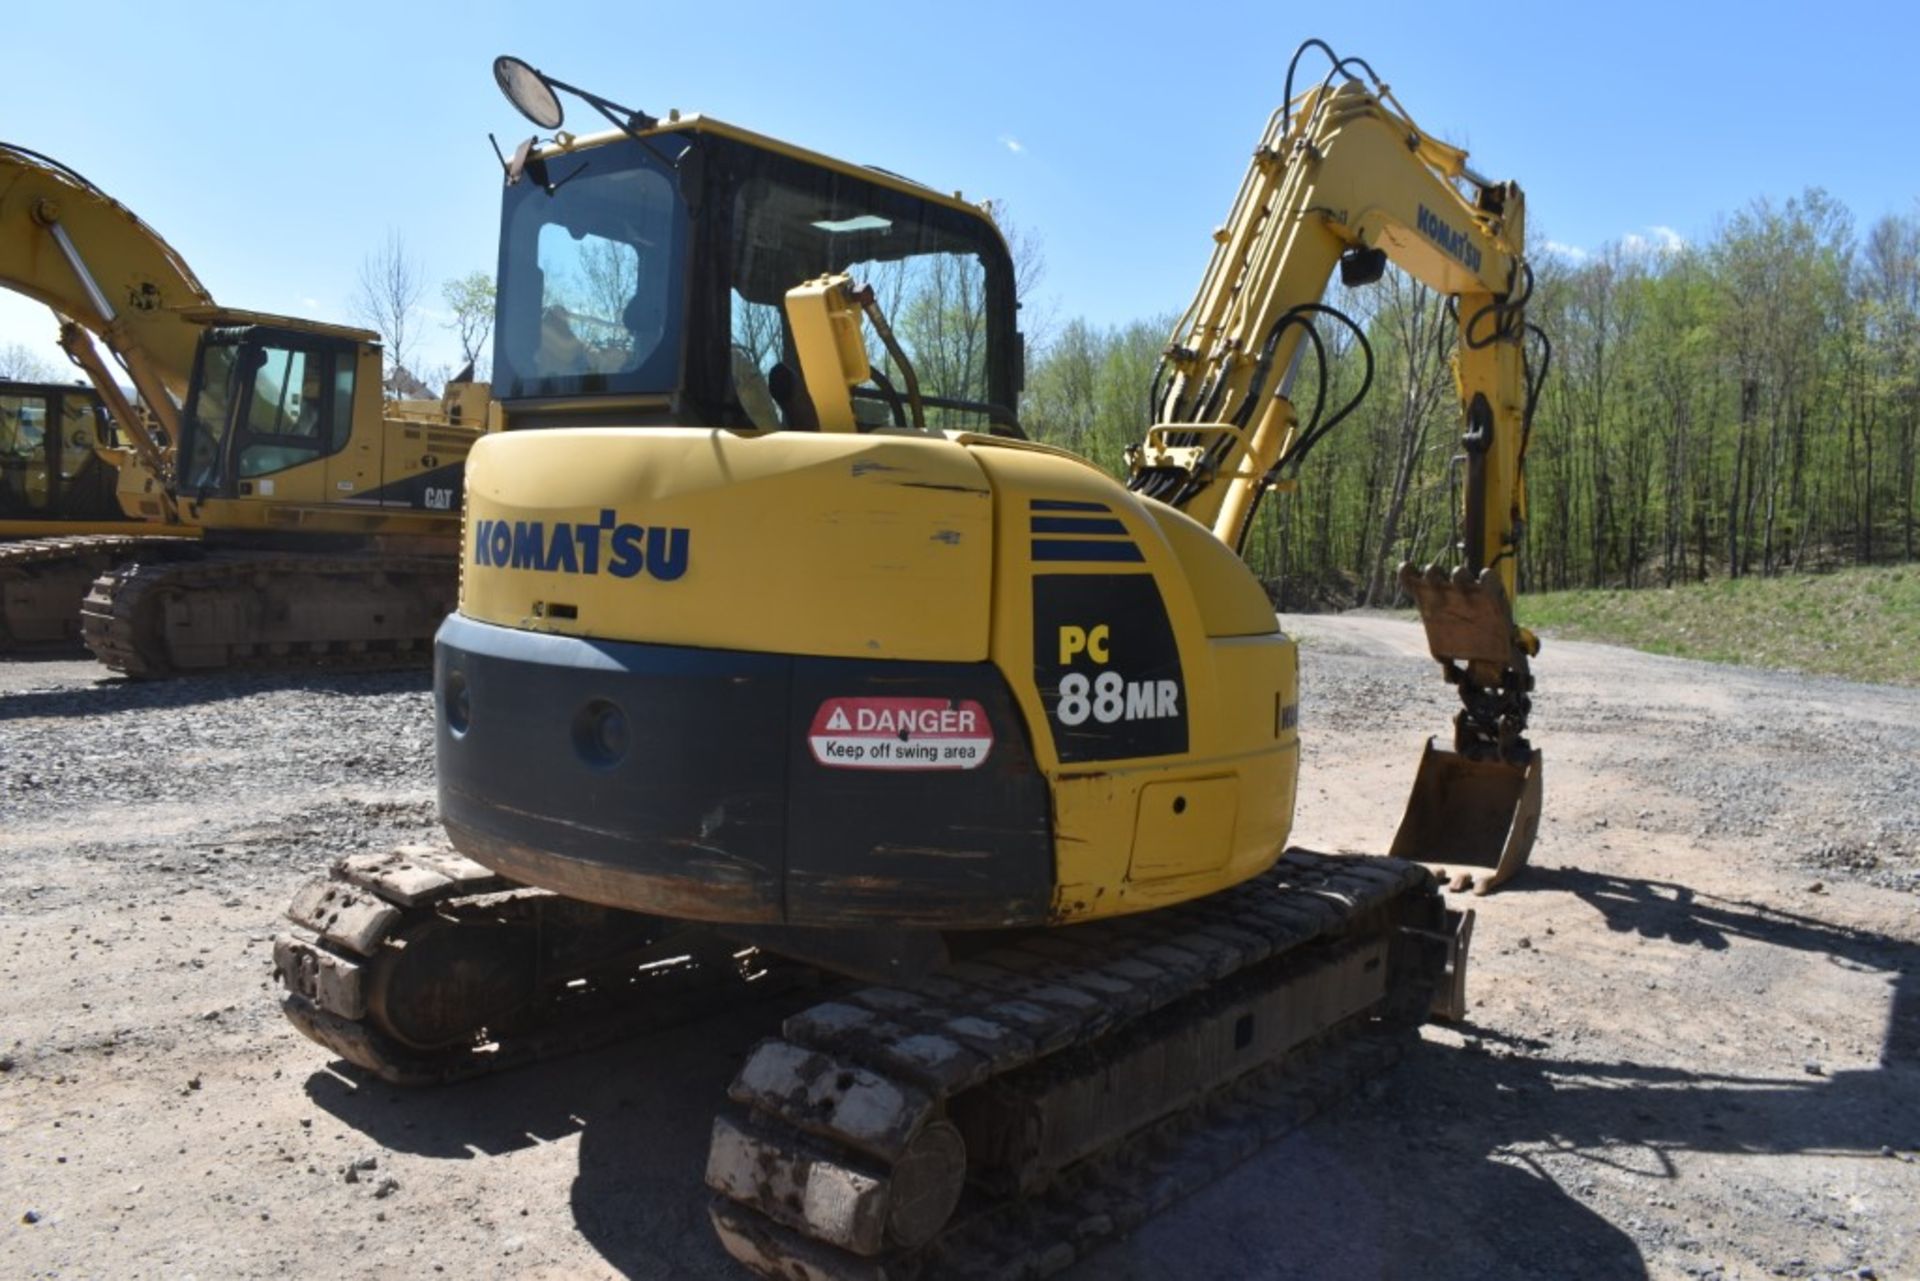 Komatsu PC88MR-8 Excavator 8704 Hours, Runs and Operates, WB 24" Bucket, Quick Coupler, Auxiliary - Image 16 of 49